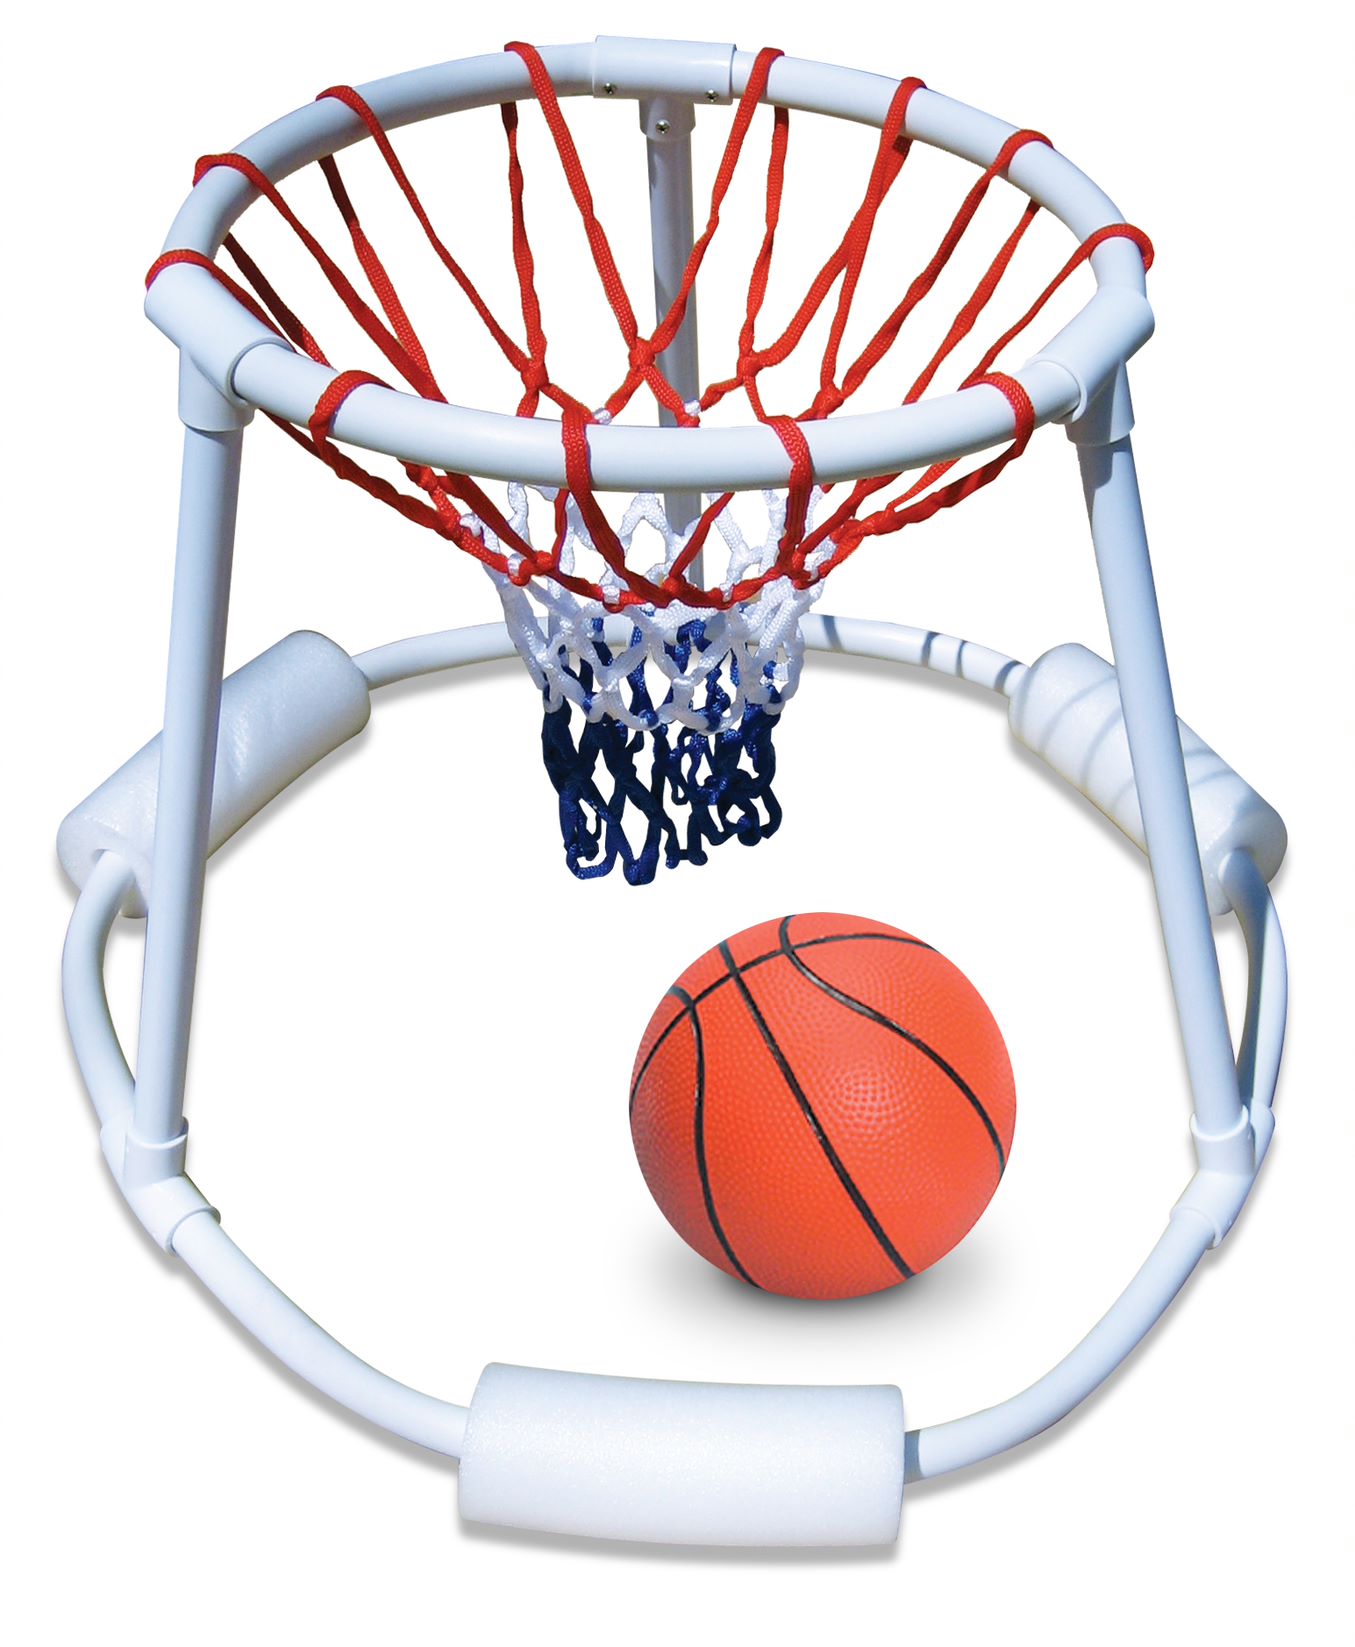 9162 Super Hoops Bsktball Game - LINERS